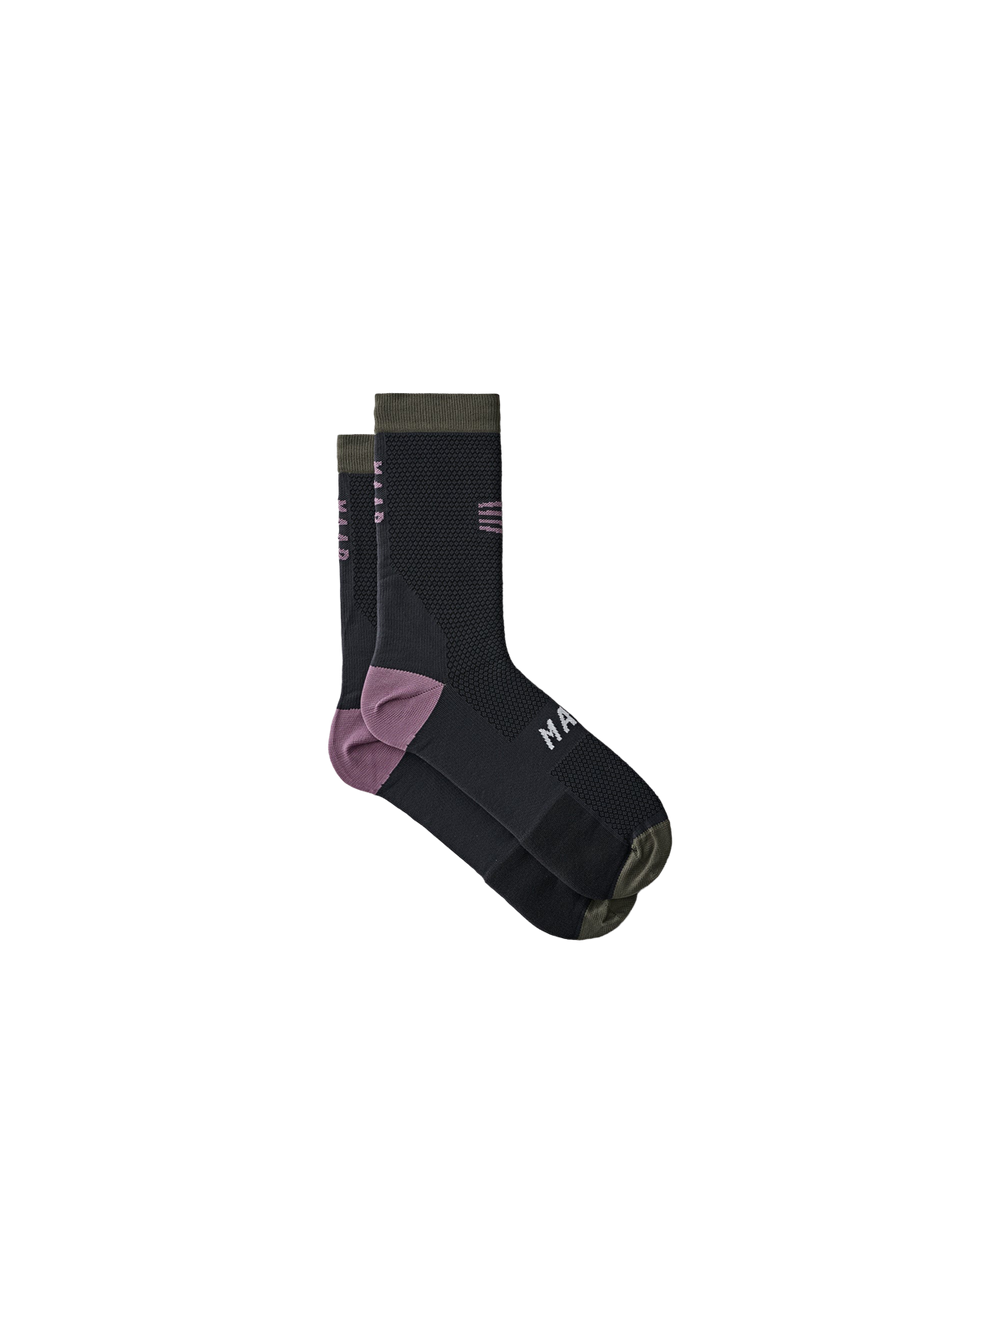 Product Image for Sphere Pro Air Sock